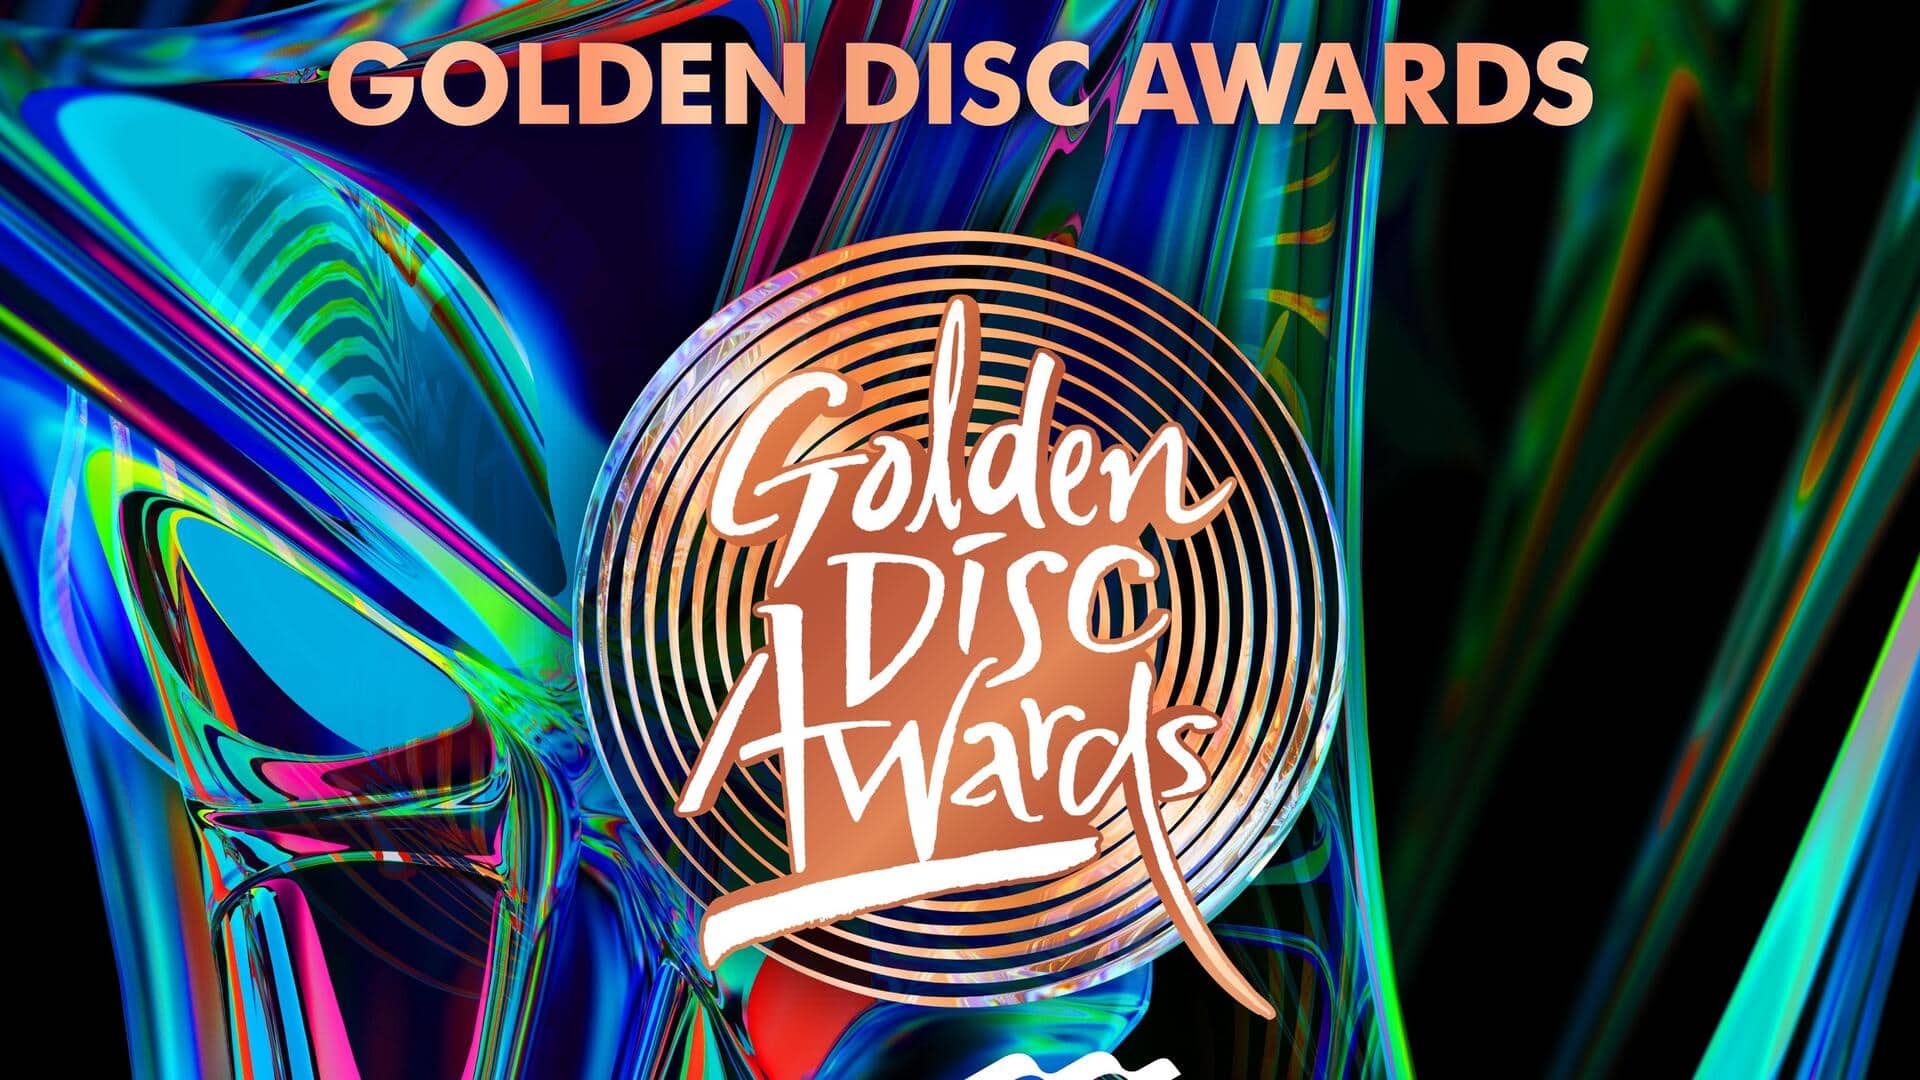 Golden Disc Awards reveals ceremony date and location details